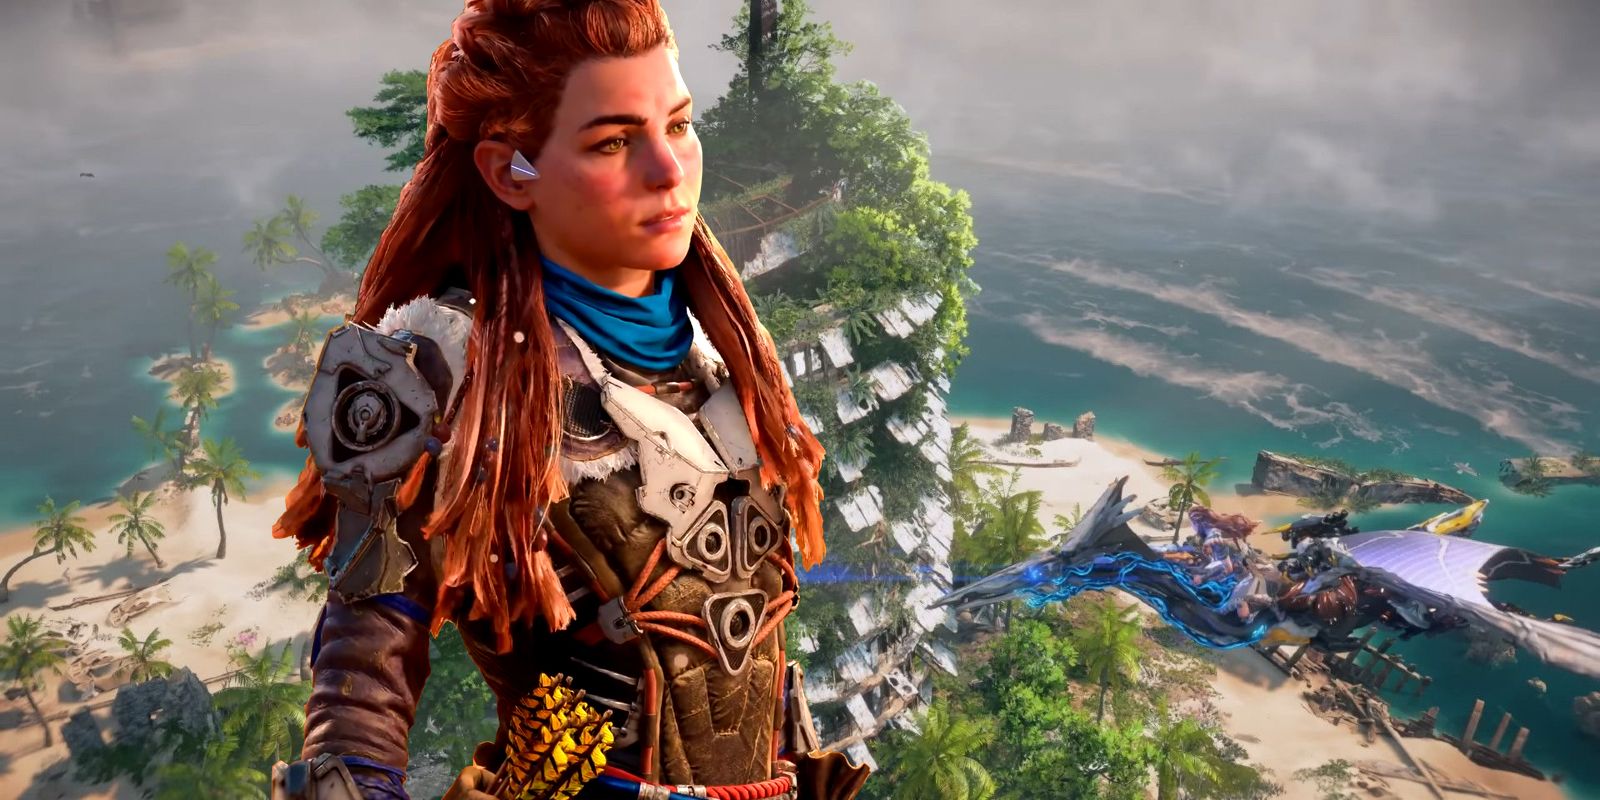 A cut out of Aloy from Horizon Forbidden West in front of a screenshot showing her riding on a Sunning over an island in the Burning Shores, the Horizon universe's name for Los Angeles.